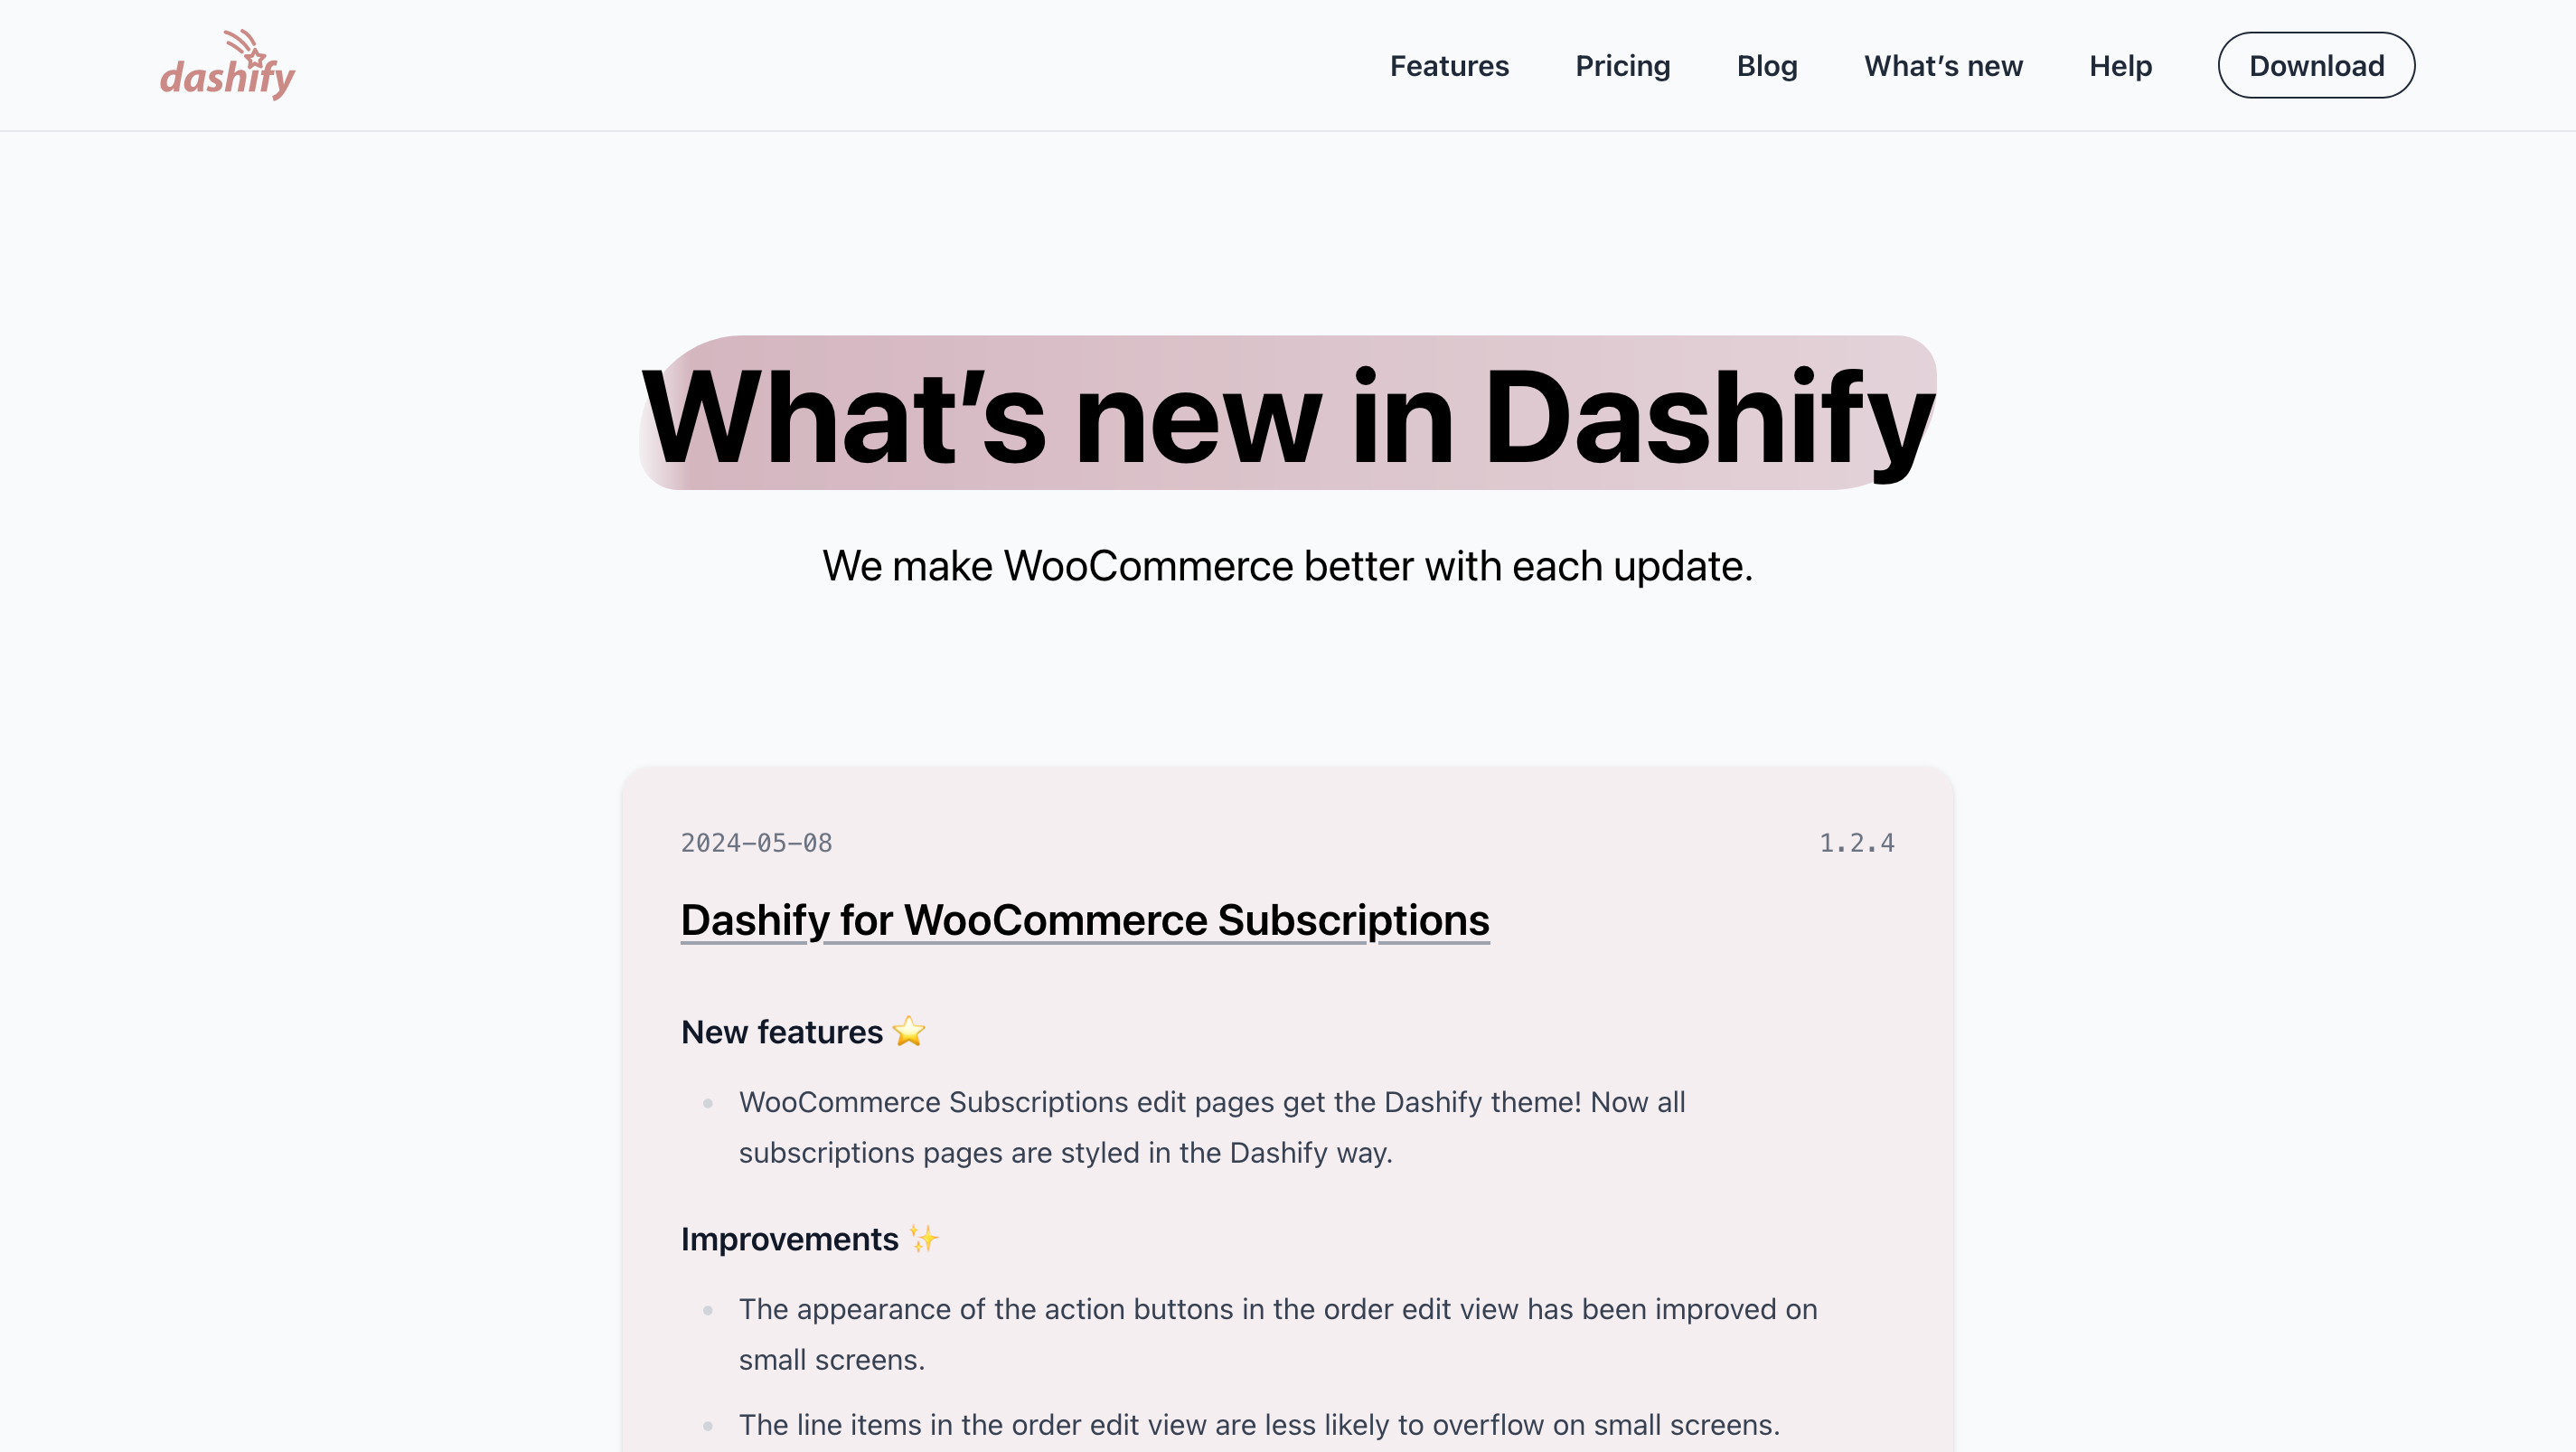 Screenshot of the newly created Dashify releases page. At the top is a large heading “What’s new in Dashify” and a subheading “We make WooCommerce better with each update.”